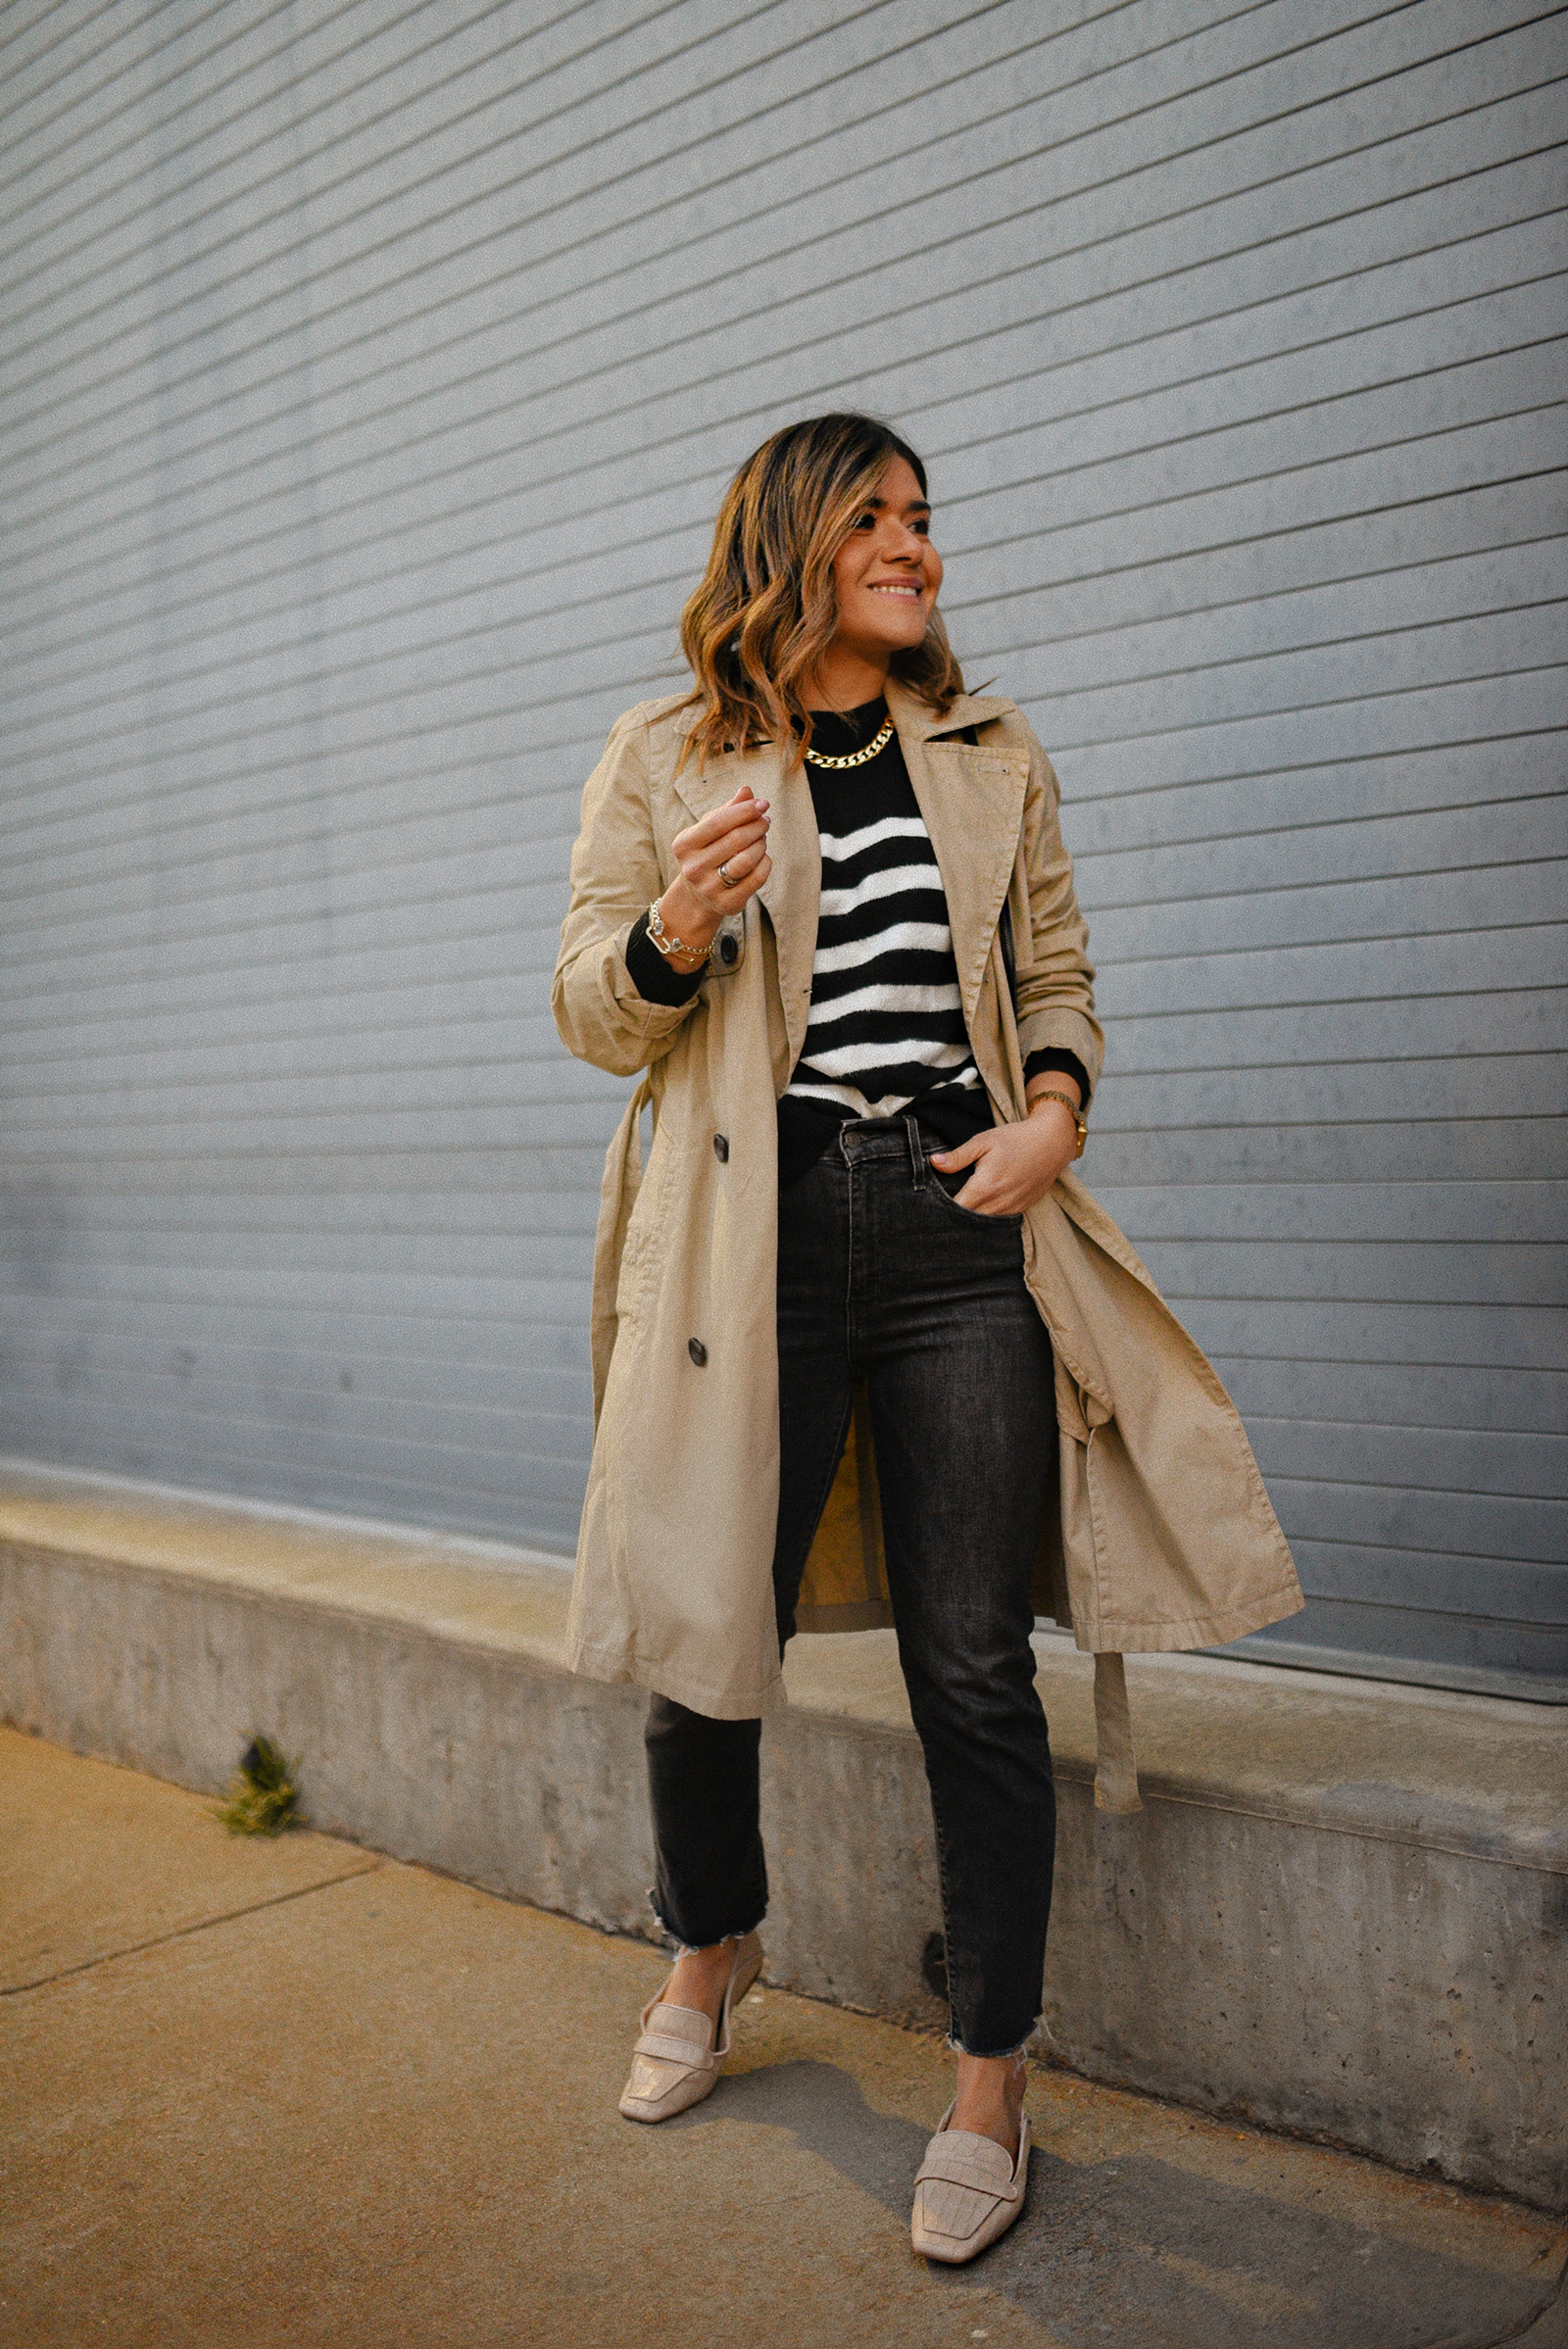 Carolina Hellal of Chic Talk wearing a Madewell trench coat, H&M striped sweater, Levi's grey jeans, Vince Camuto flats and YSL crossbody bag. 